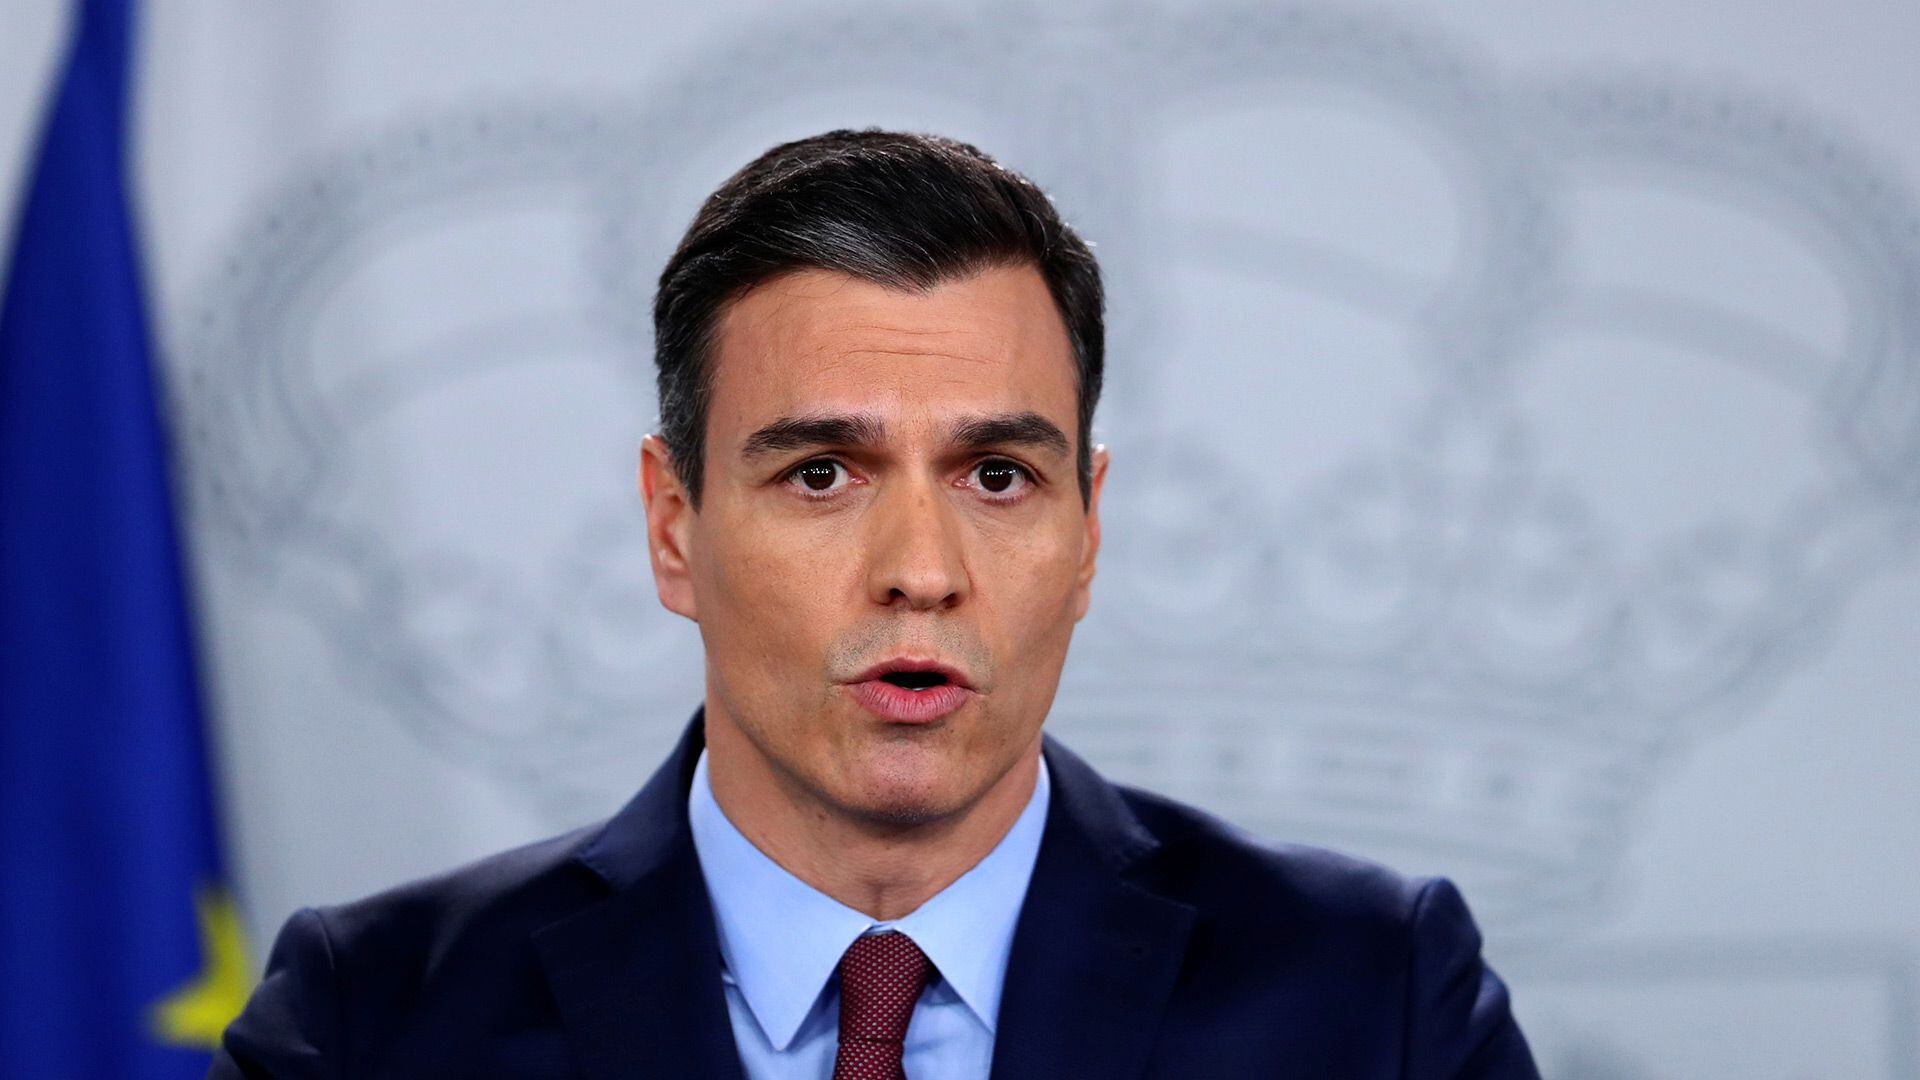 Spanish Prime Minister Pedro Sanchez speaks during a news conference after taking part in a conference call with European leaders at the Moncloa Palace in Madrid, Spain, March 10, 2020. REUTERS/Sergio Perez